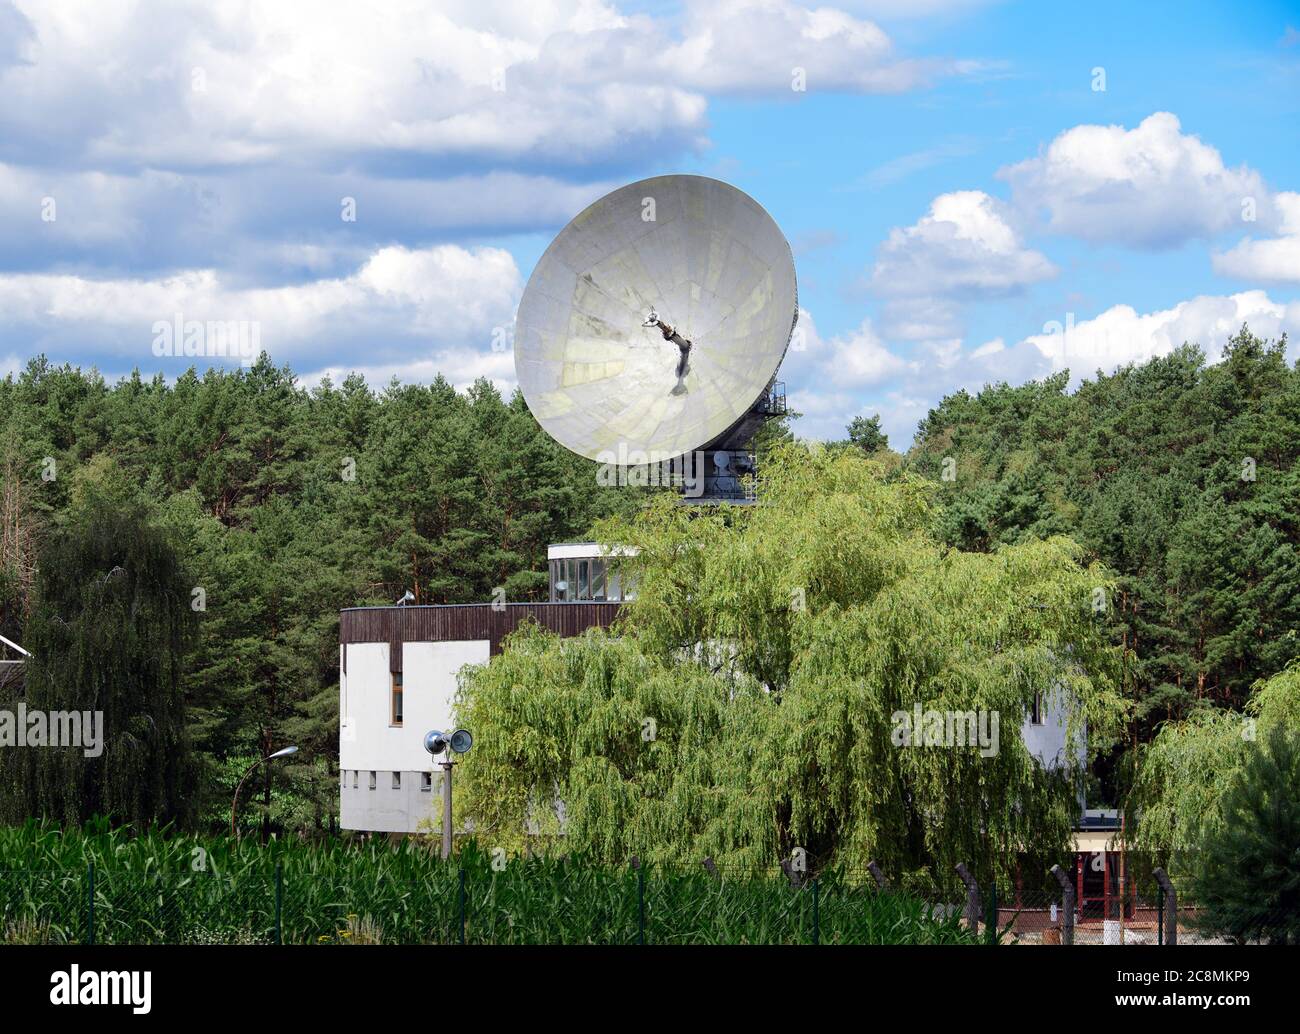 22 July 2020, Brandenburg, Bad Saarow/Ot Neu-Golm: The 12-meter parabolic  antenna of the former Intersputnik satellite ground station can be seen  above the trees on the cylindrical building of the Orbita-2 type.